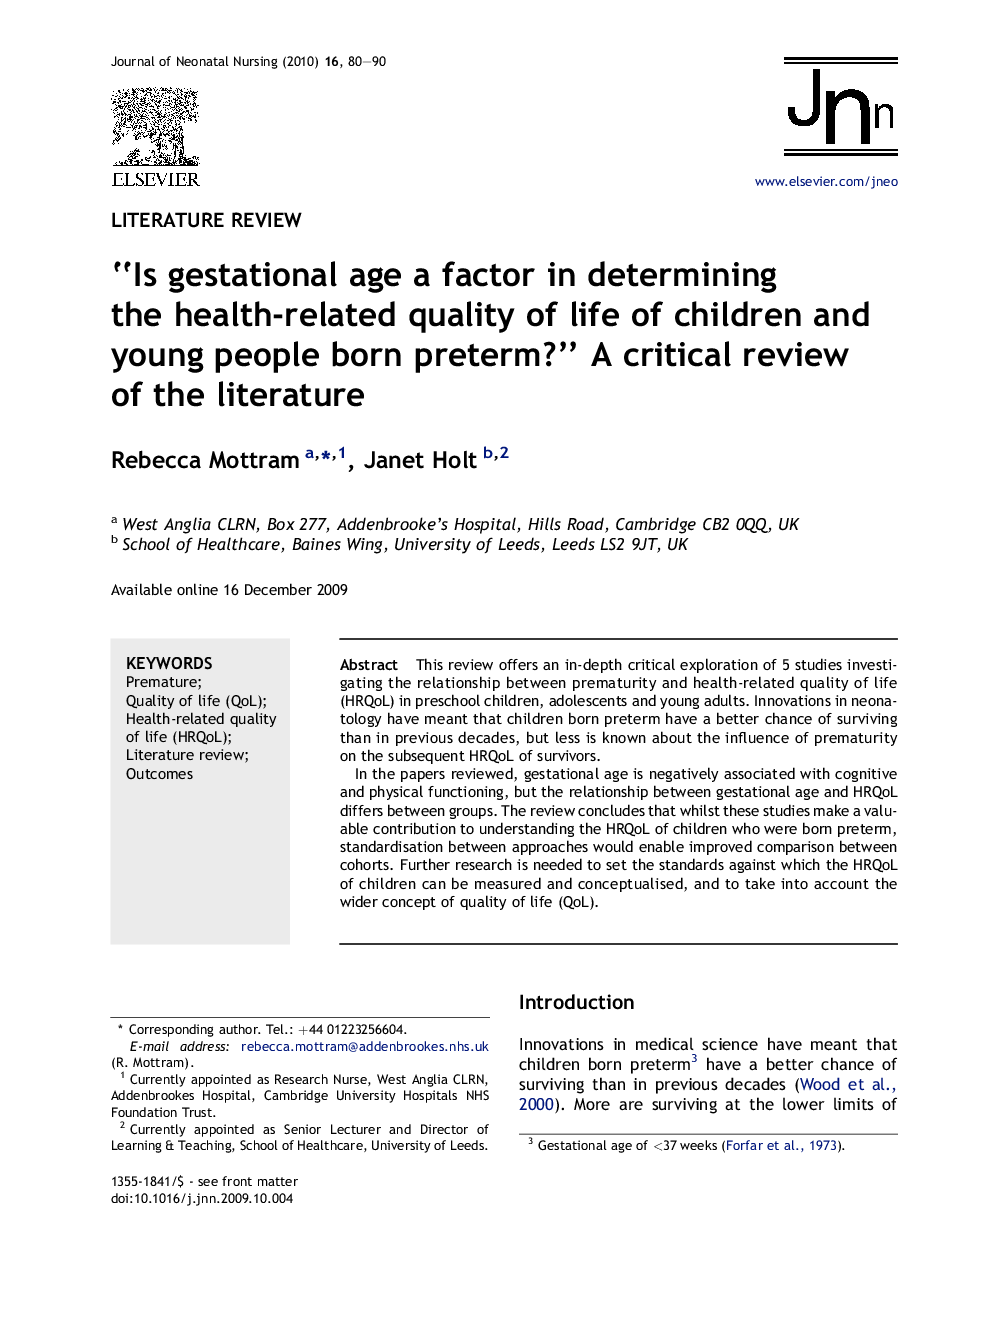 “Is gestational age a factor in determining the health-related quality of life of children and young people born preterm?” A critical review of the literature